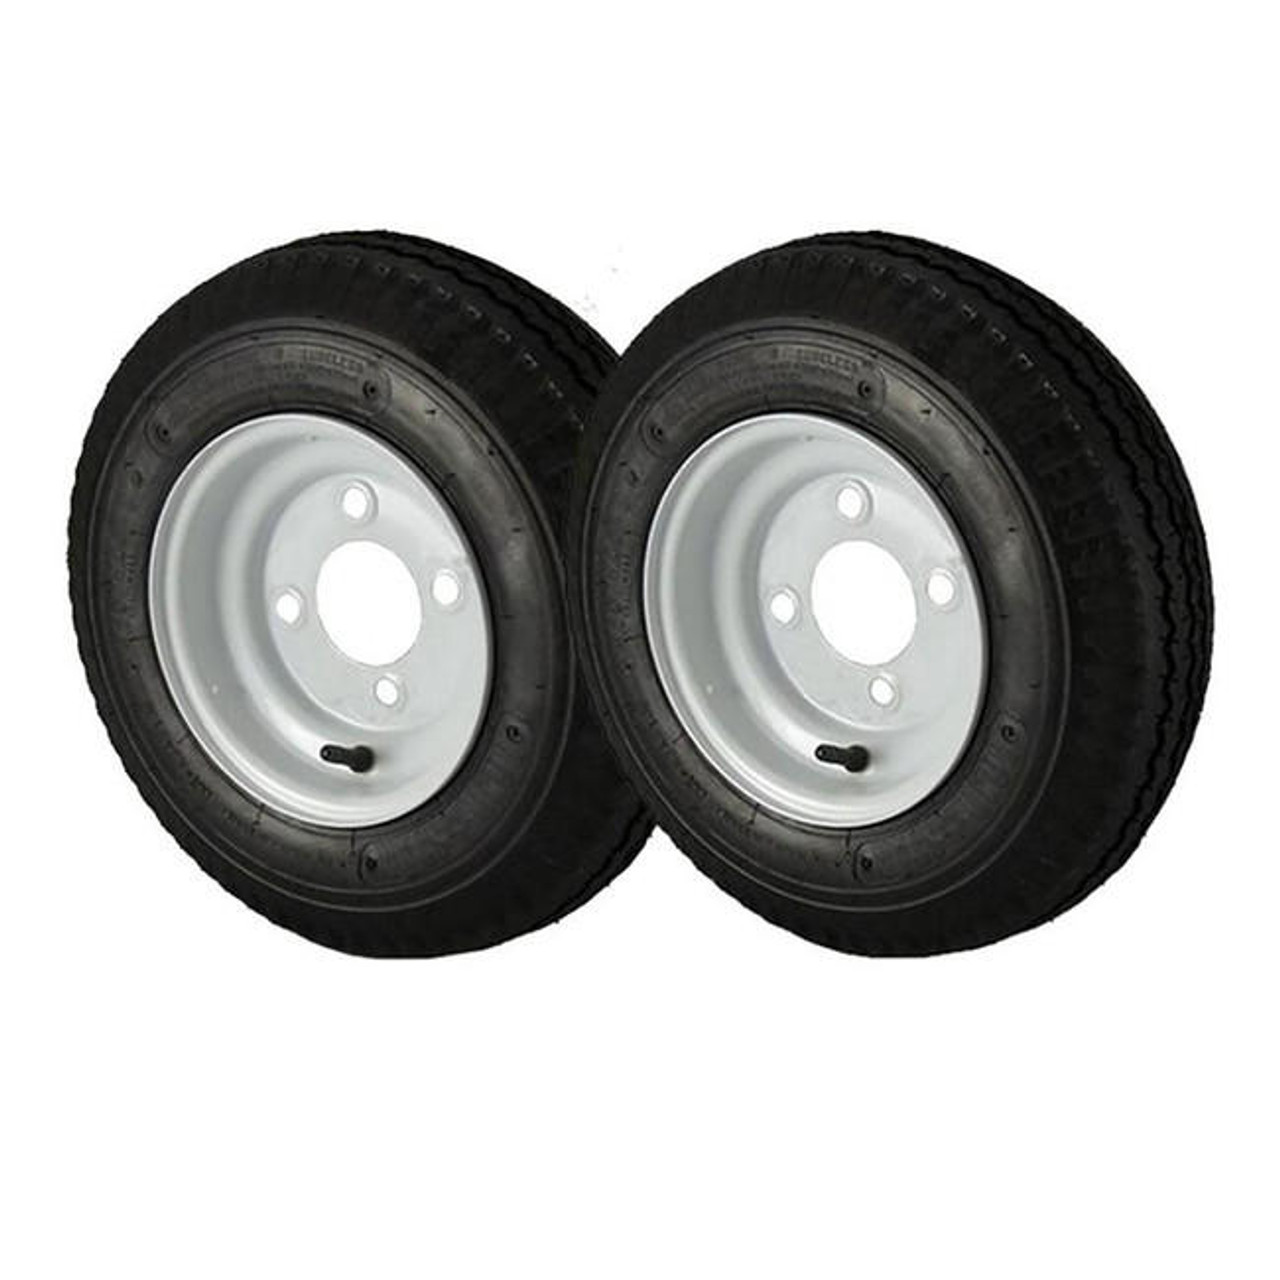 Load Star Tire and Rim Assembly: 4.80/4.00-8 B/4H